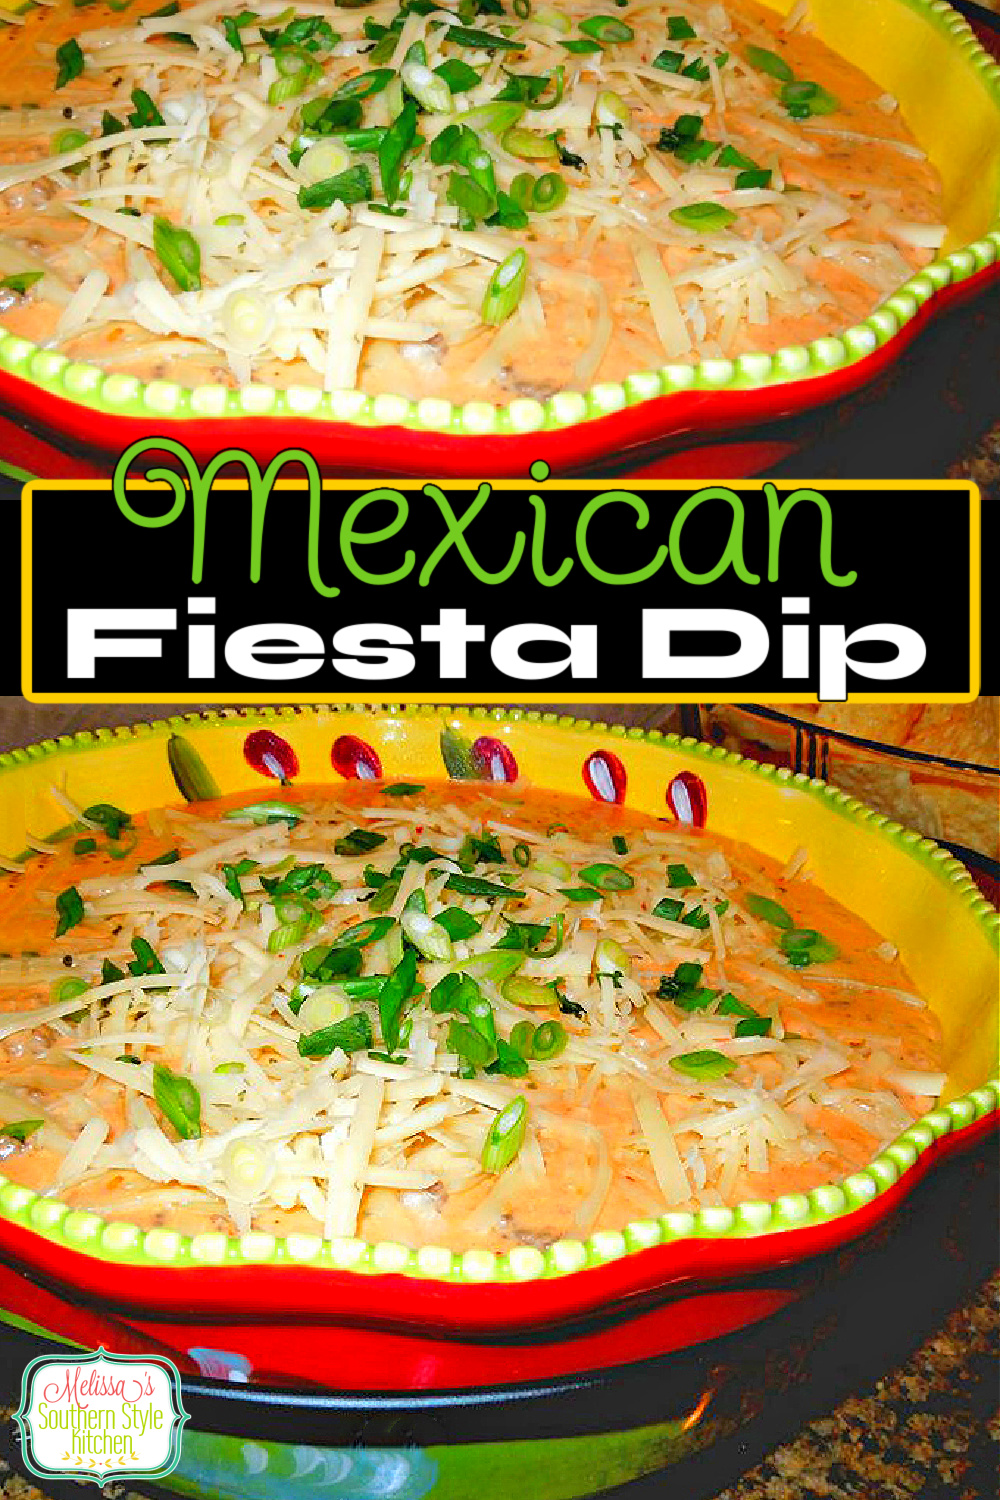 Insanely delicious and oh-so-dippable creamy Mexican Fiesta Dip for parties and snacking #fiestadip #cheesedip #quesodip #cheesediprecipes #easycheesedip #mexicanfiestadip #appetizers #gamedayrecipes via @melissasssk